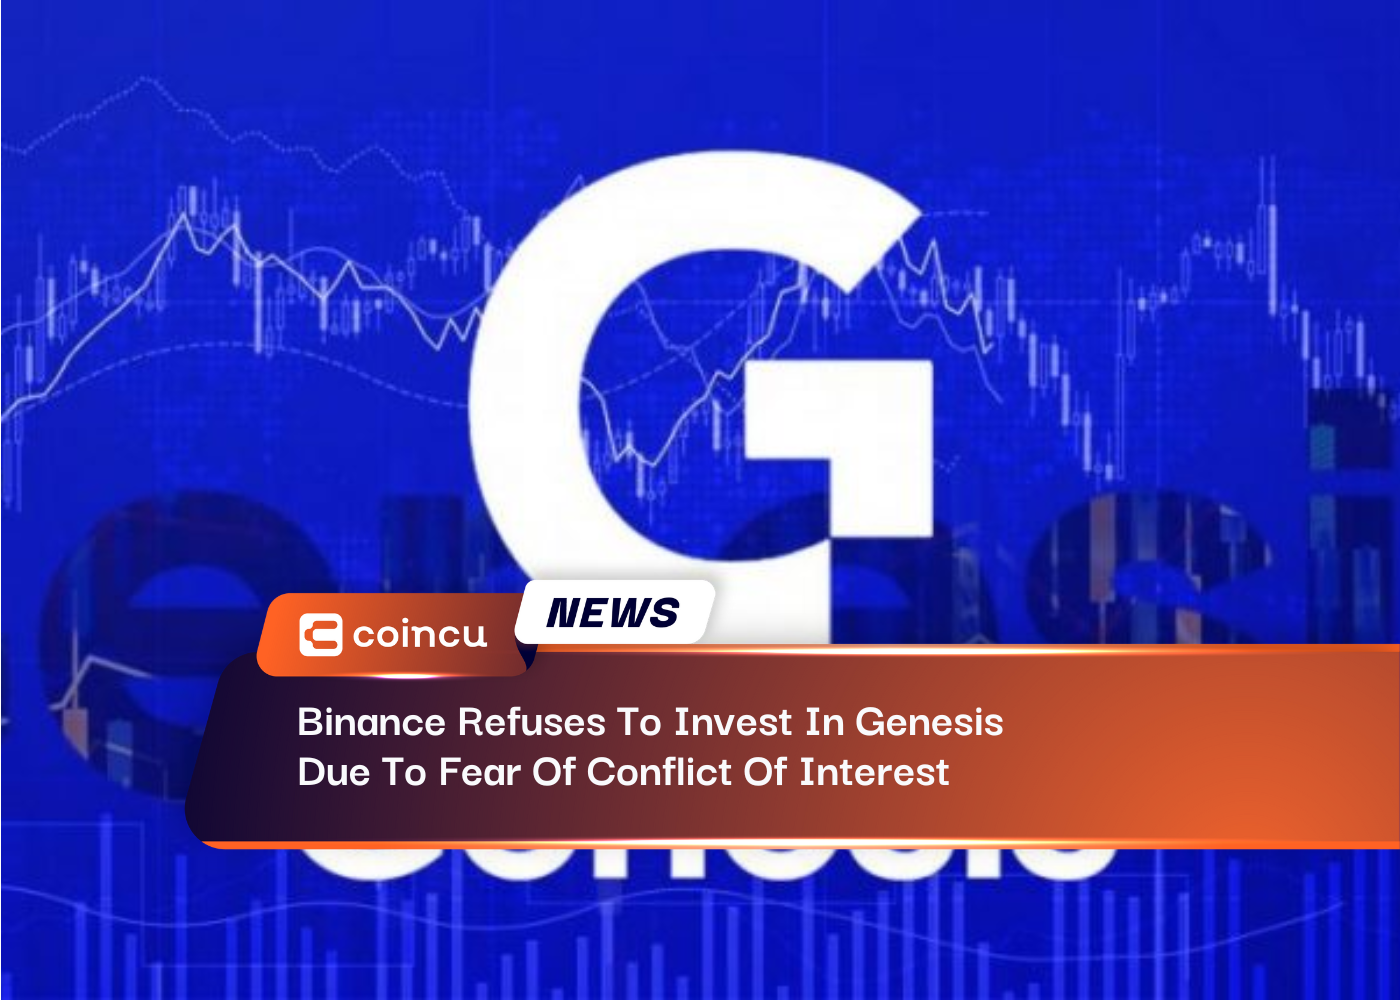 Binance Refuses To Invest In Genesis Due To Fear Of Conflict Of Interest